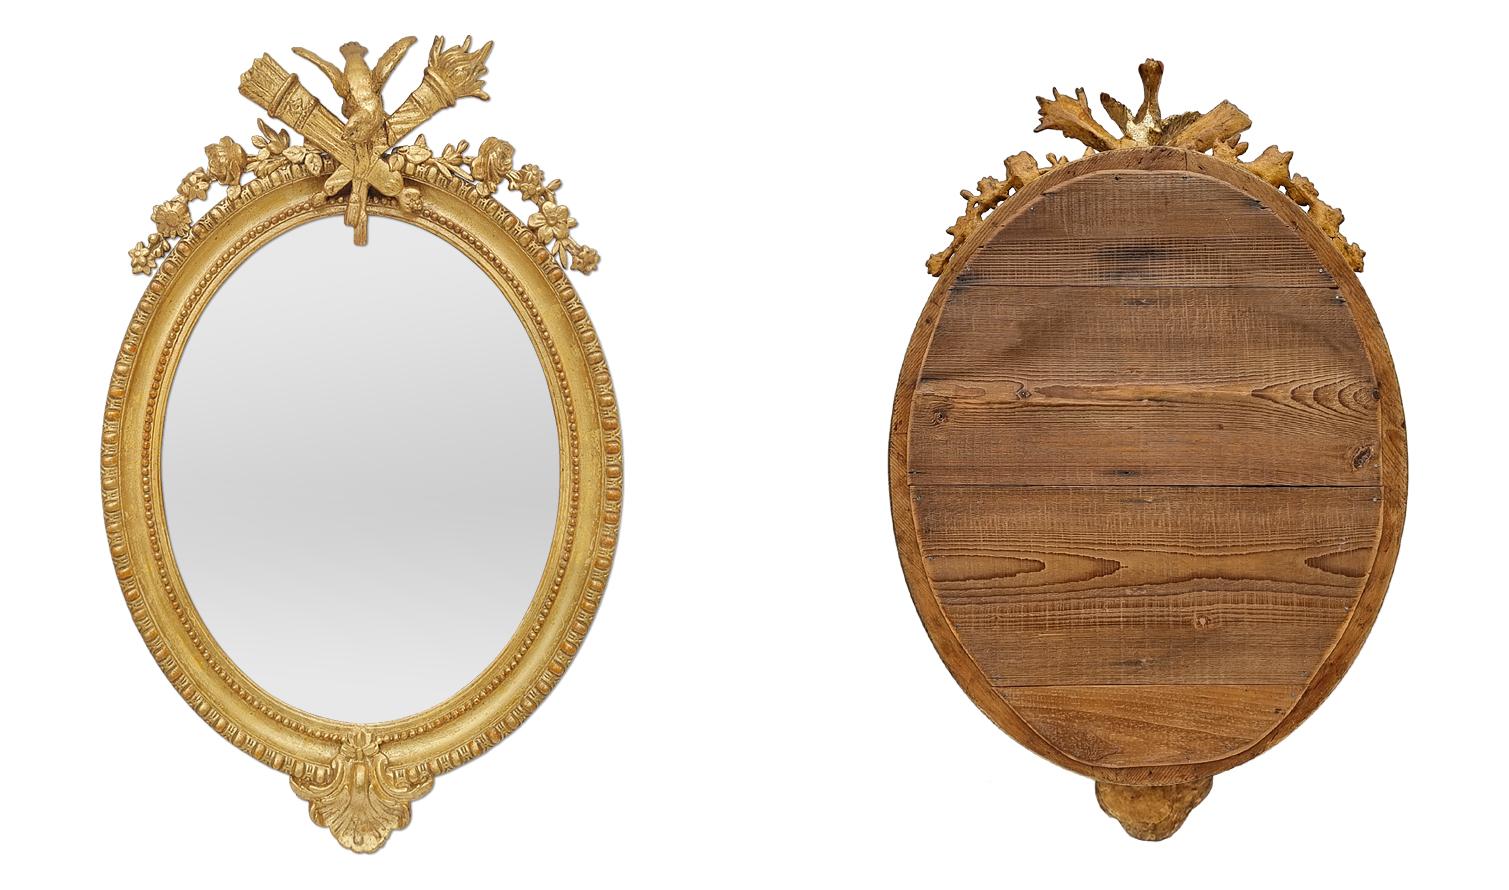 Rare Antique French Giltwood Oval Mirror With Pediment, circa 1890 For Sale 2